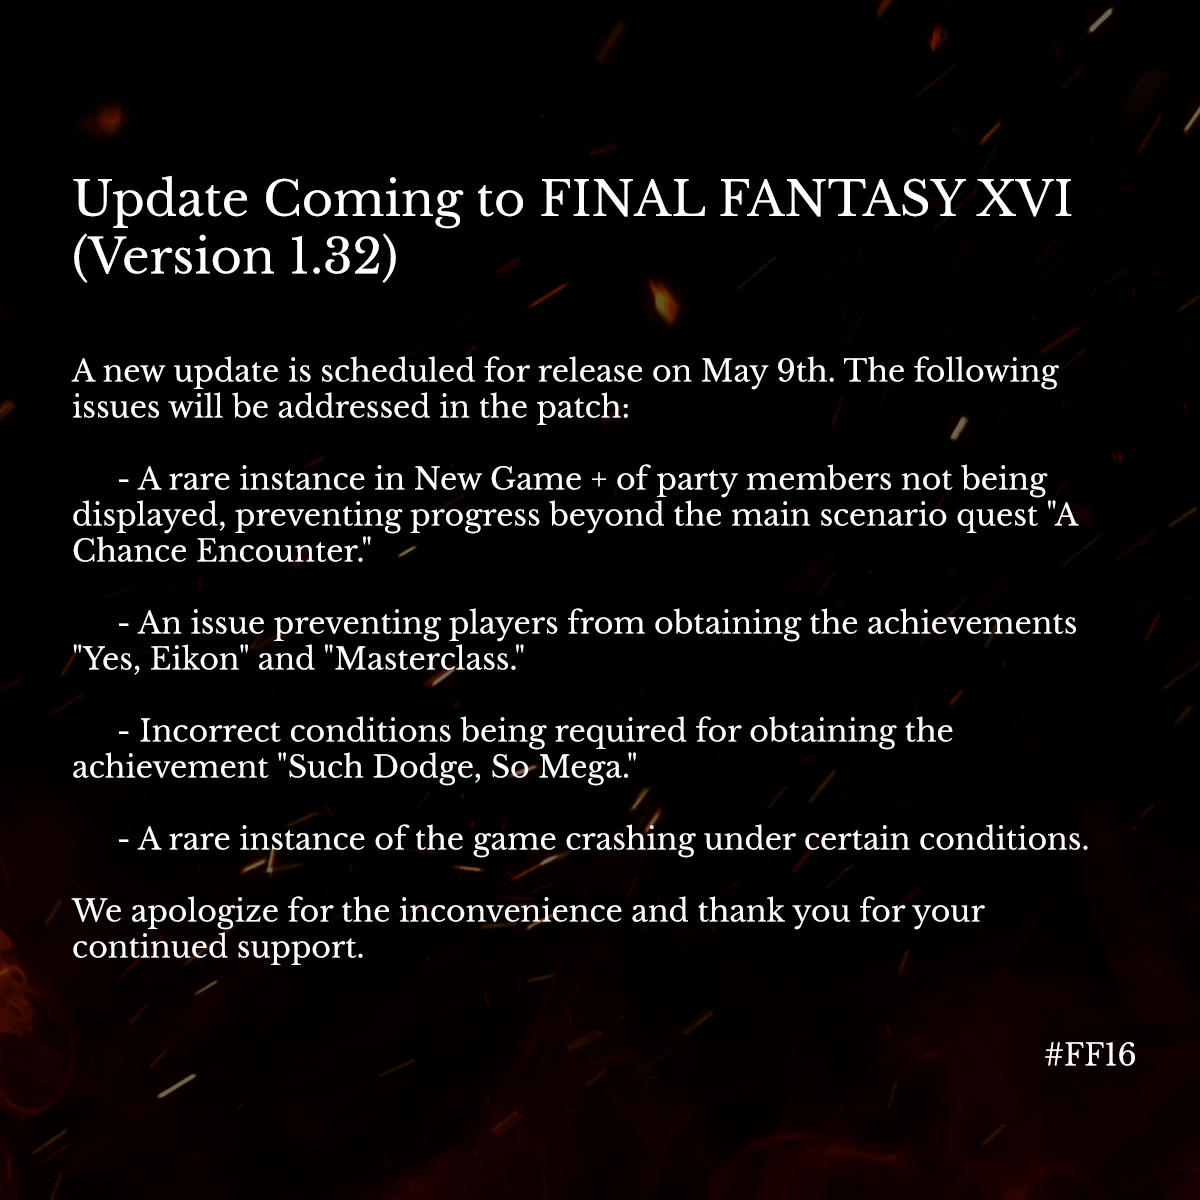 An update for Final Fantasy XVI coming on May 9th. #FF16